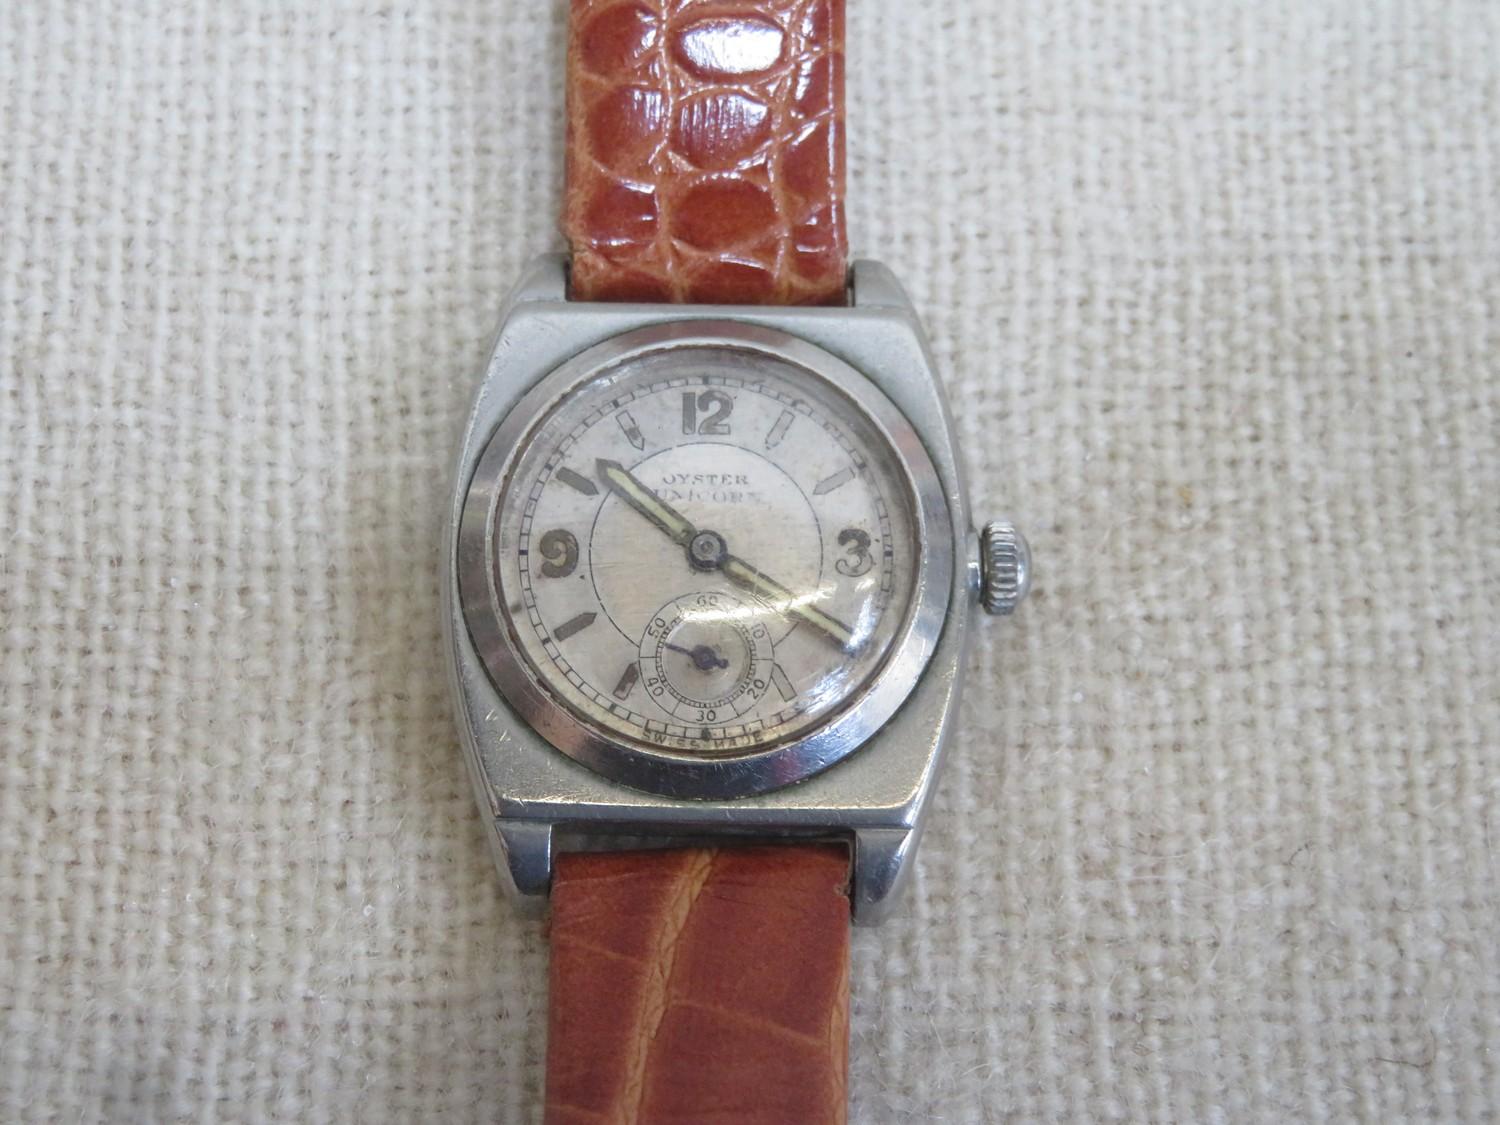 Oyster Unicorn by Rolex, early/mid 20th century wristlet watch with circular dial, luminescent - Image 2 of 2